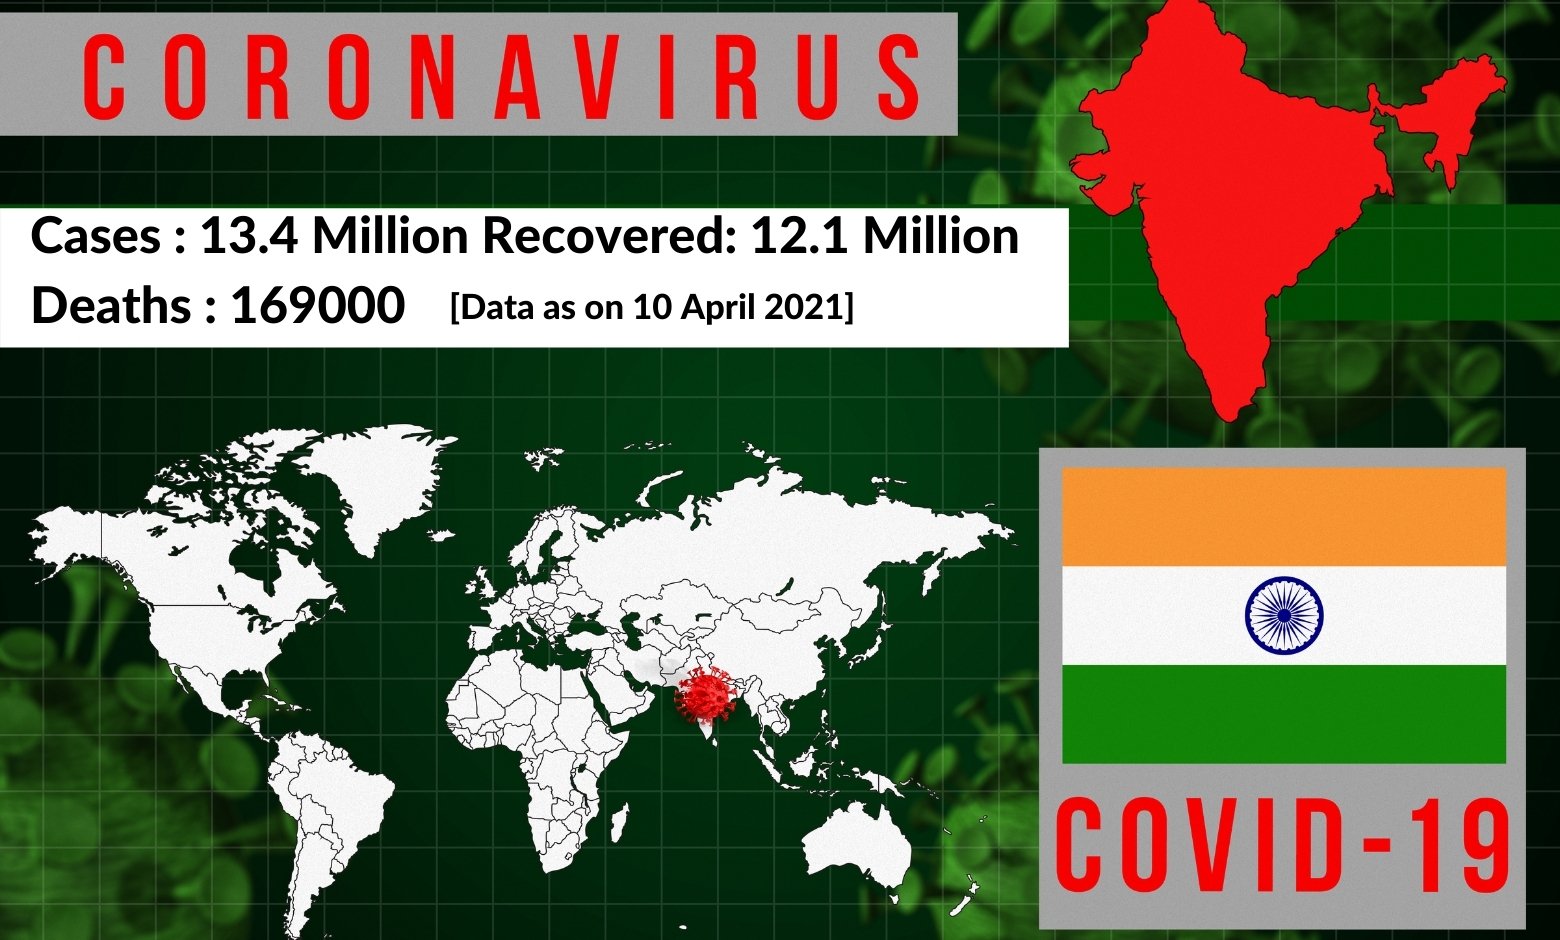 Covid19 cases in India as on 10th April 2021